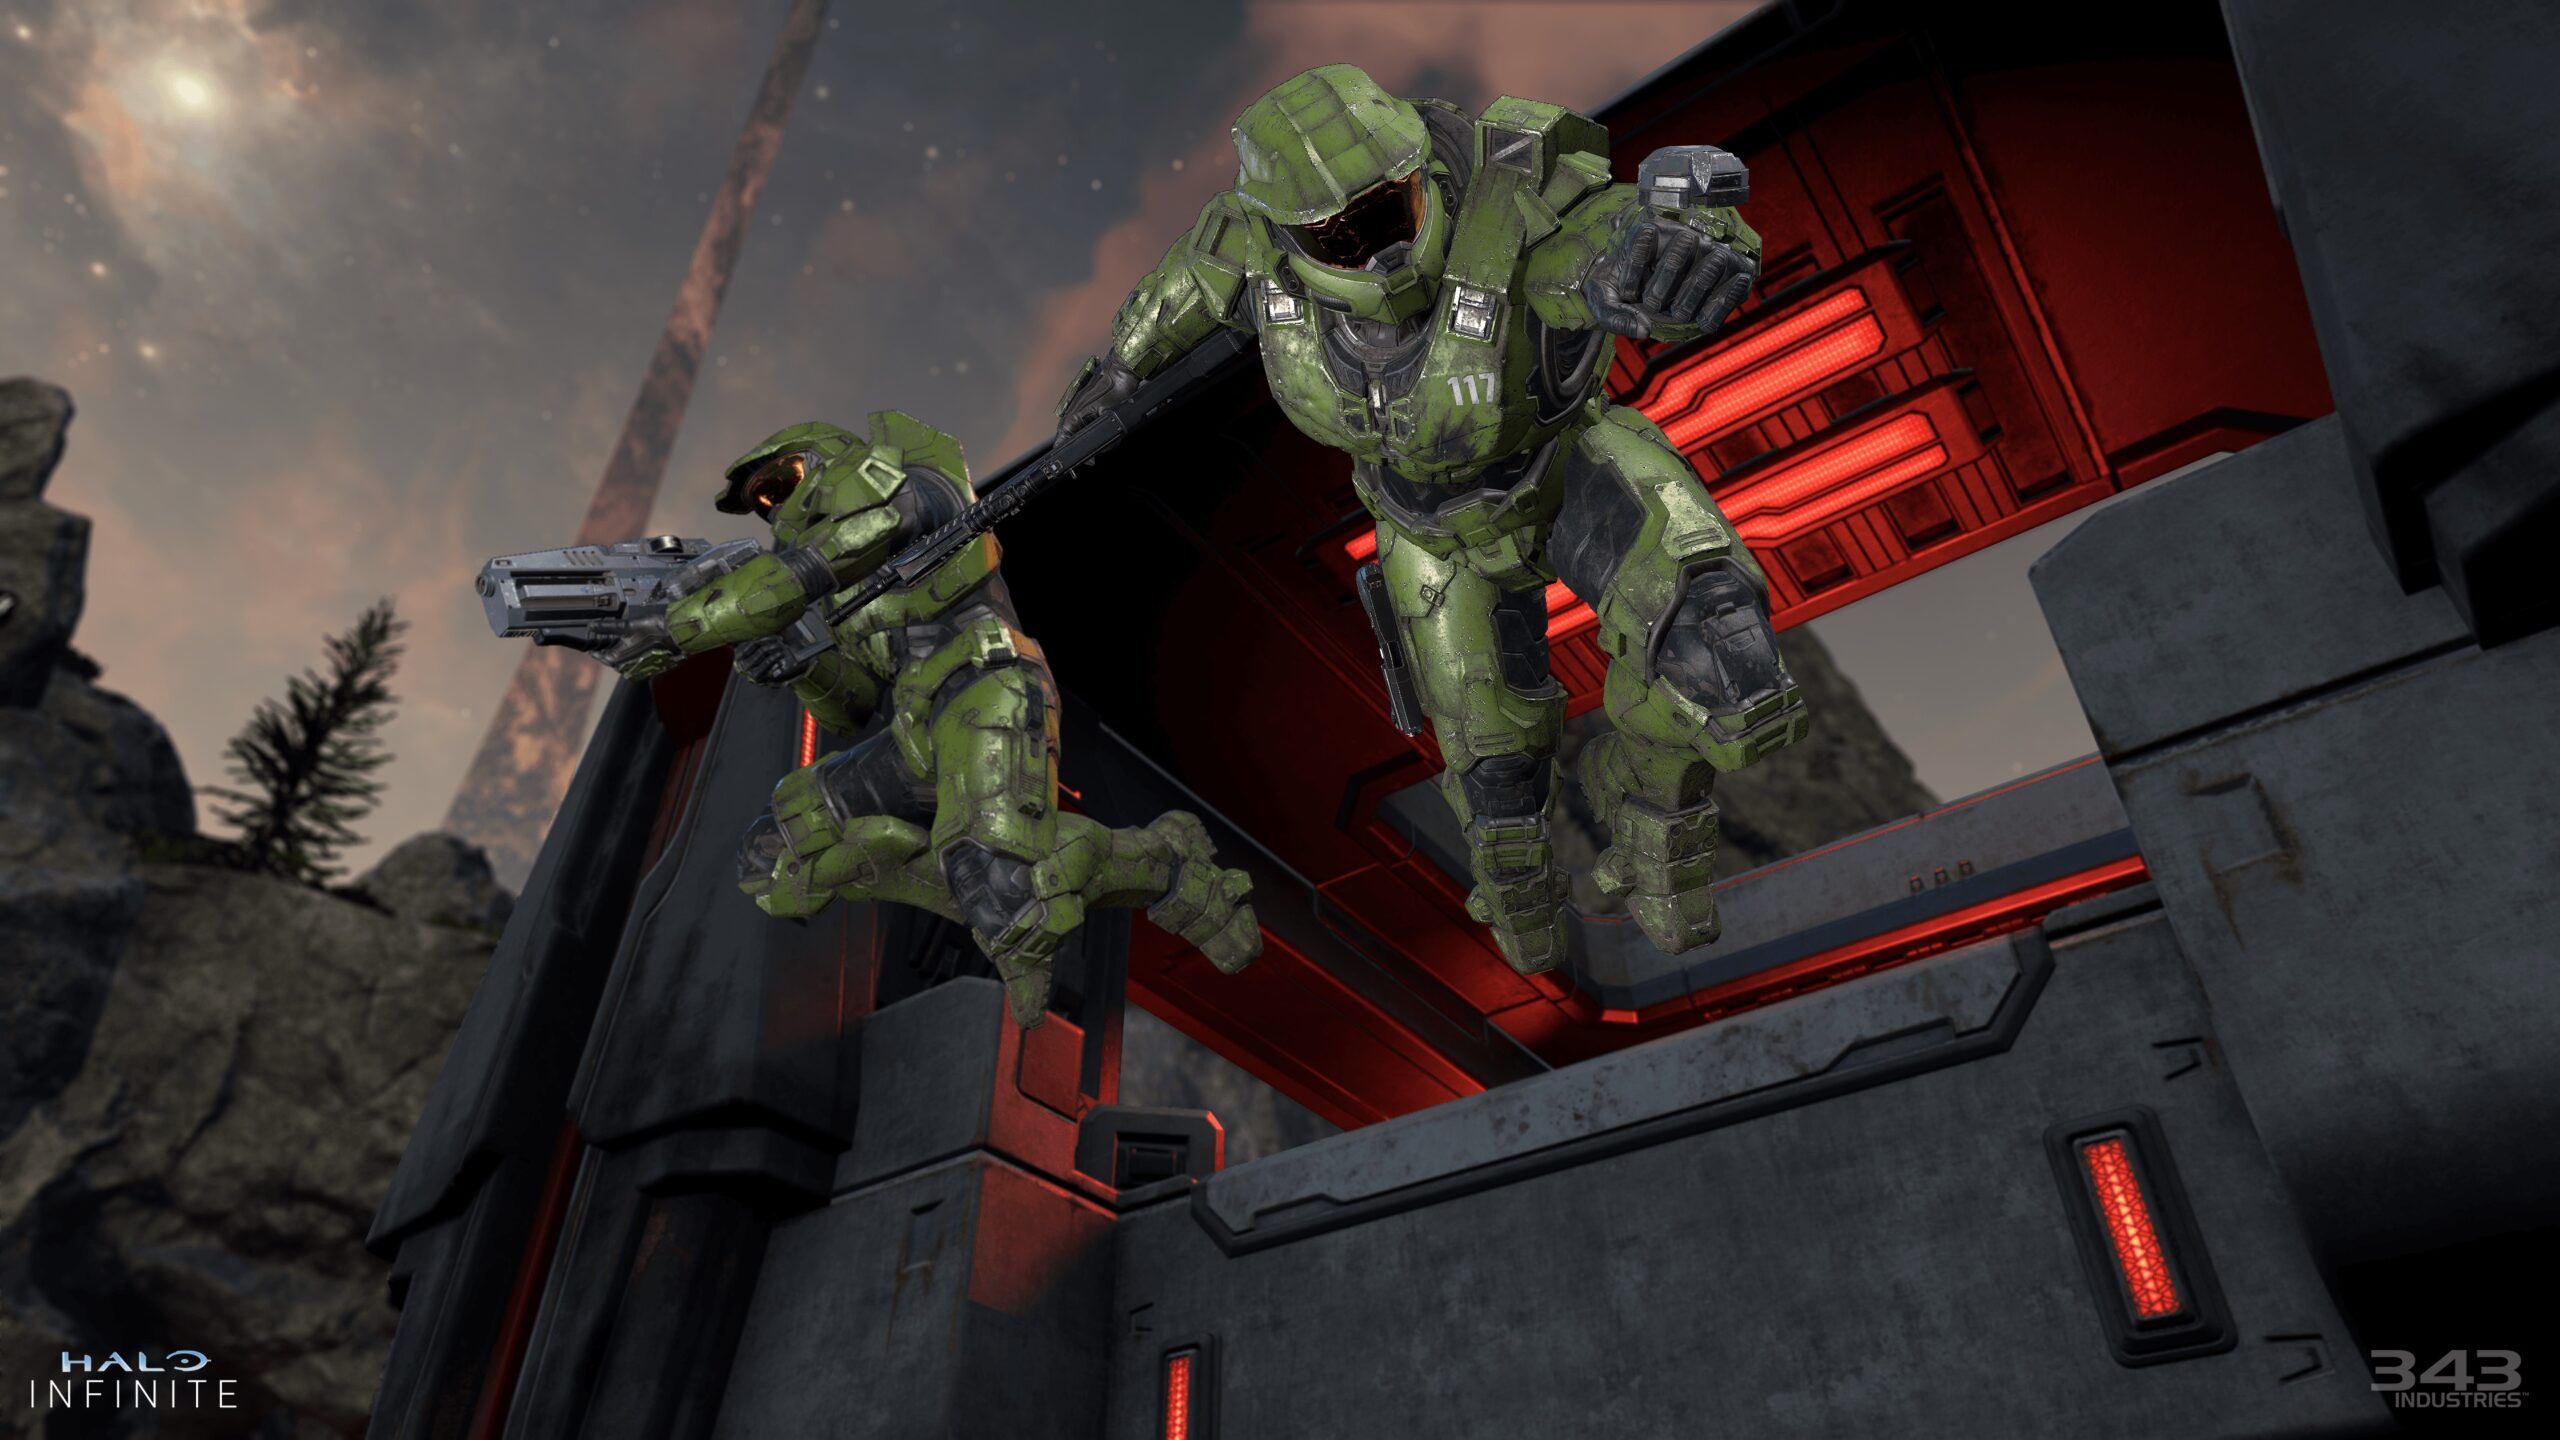 Campaign Co-Op image of two Master Chief's jumping from a Banished structure